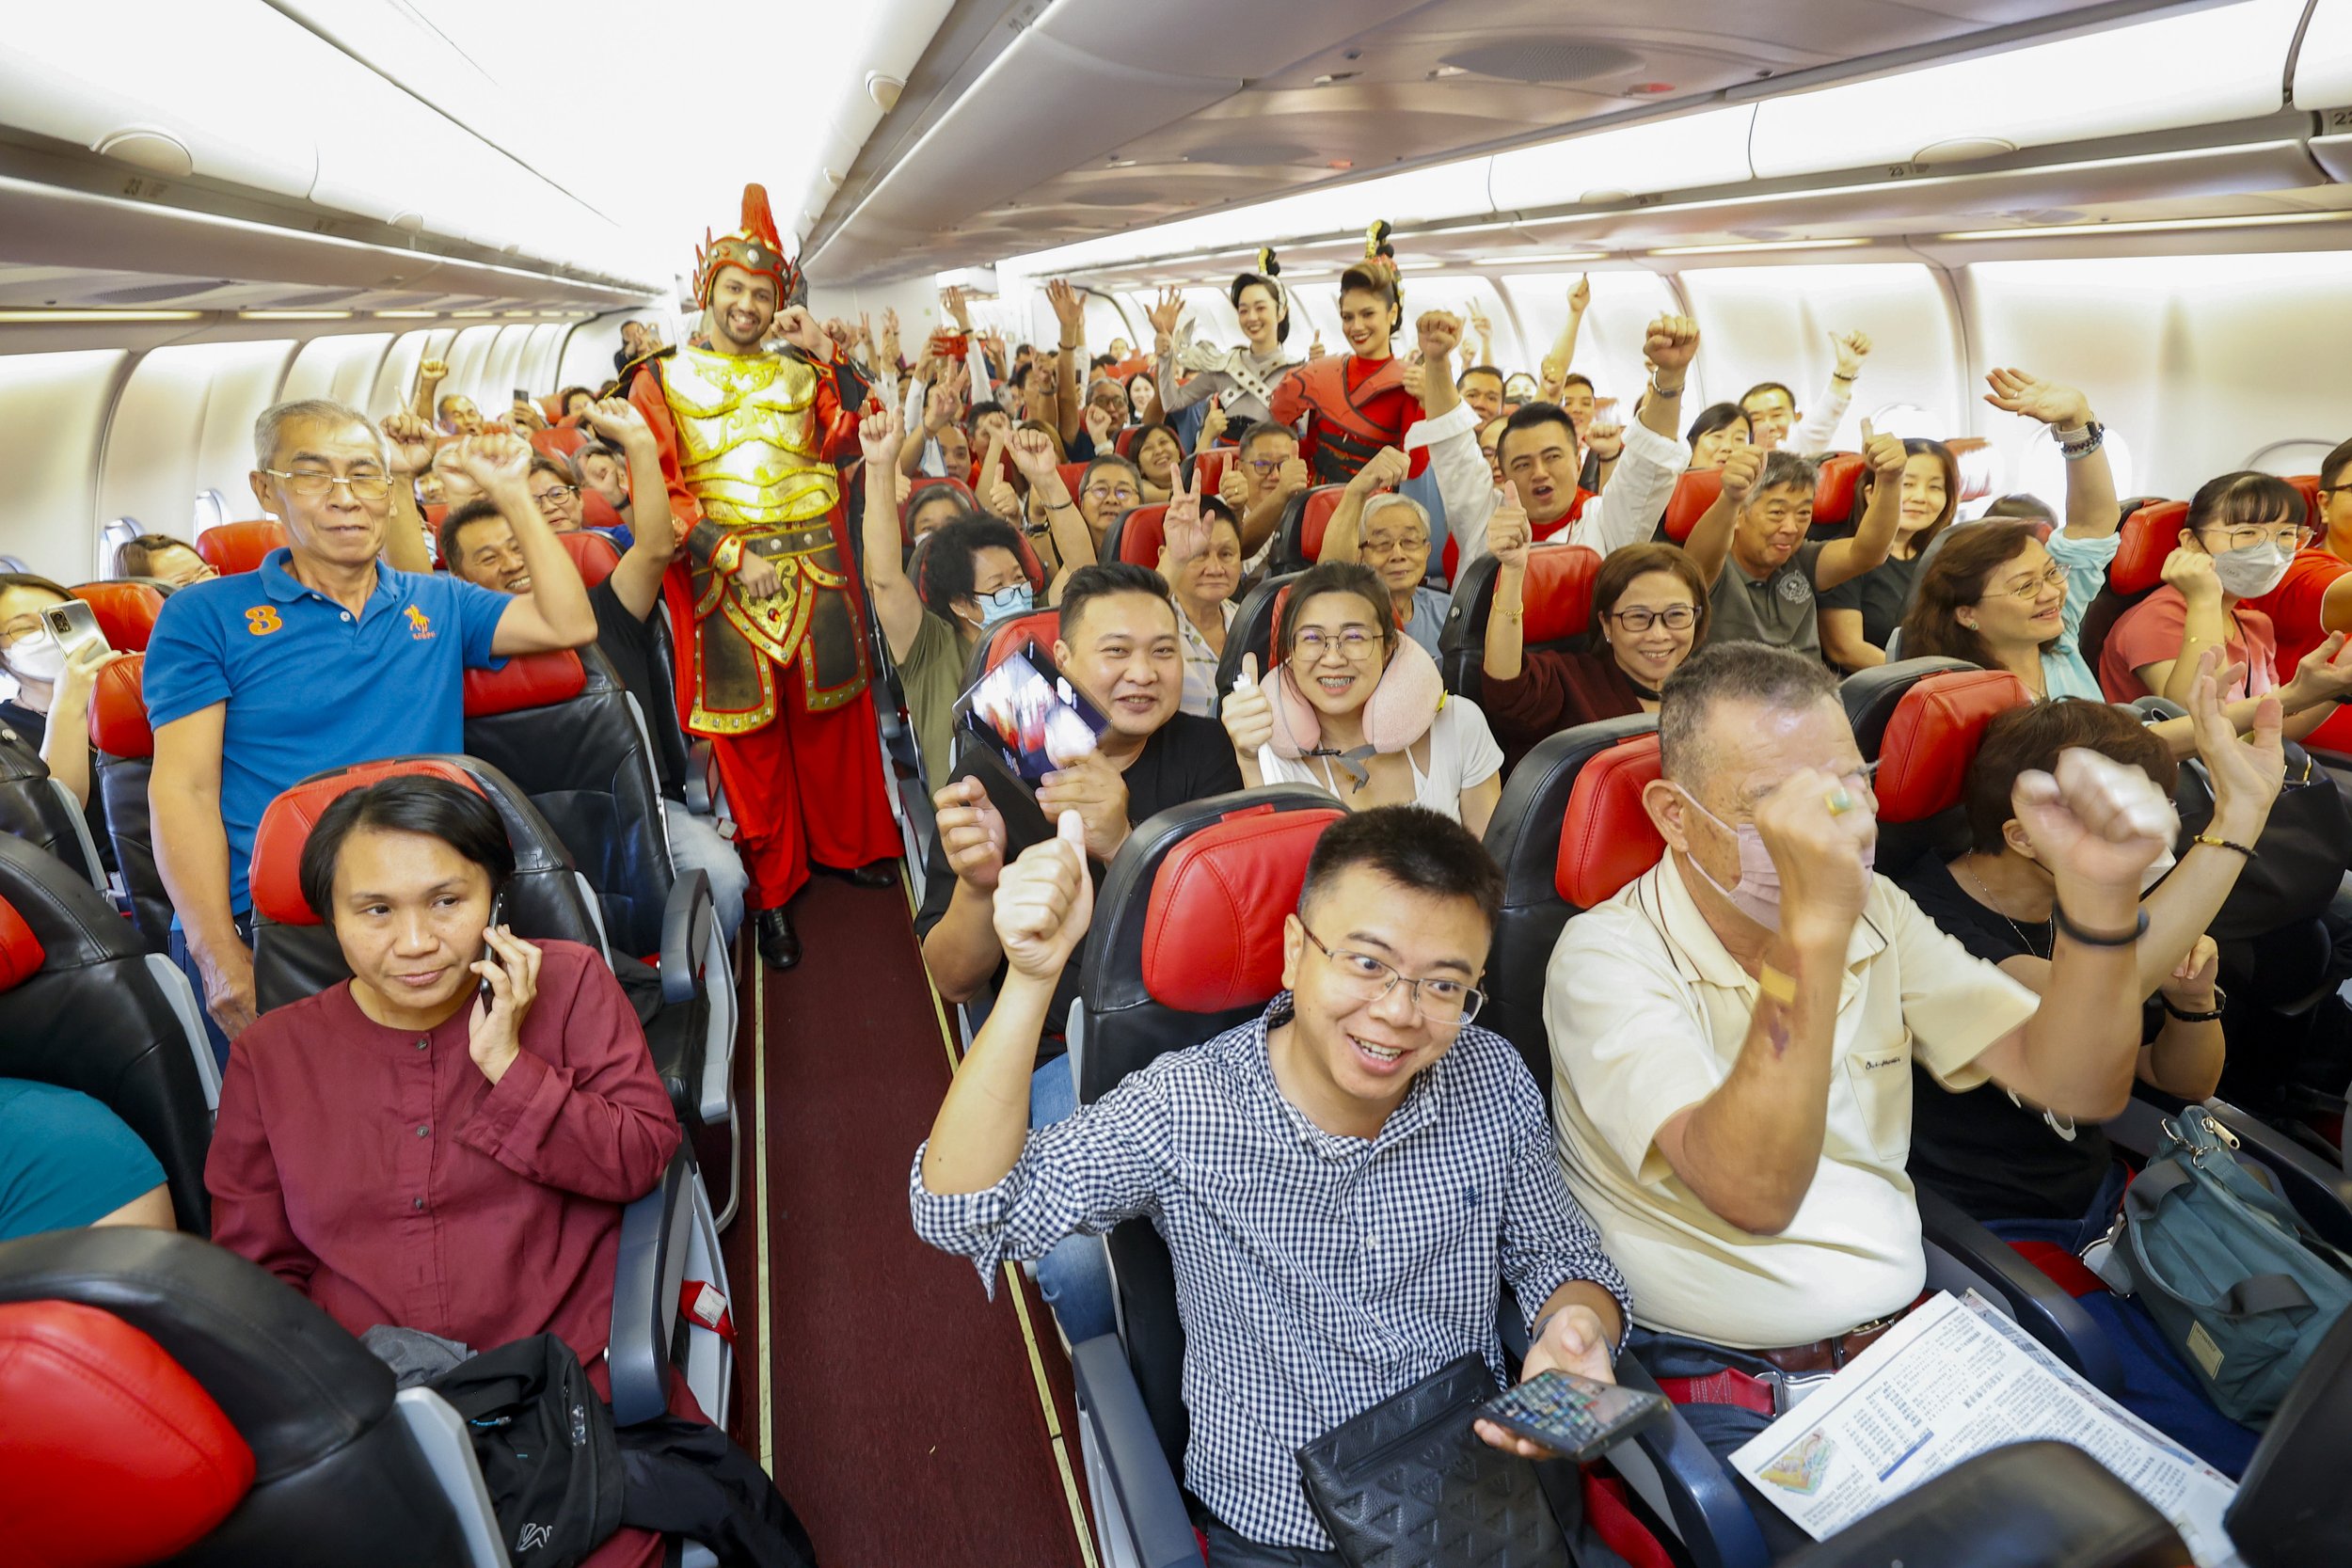 Excited guests were warmly greeted onboard by AirAsia Fun Team prior to the flight departure.